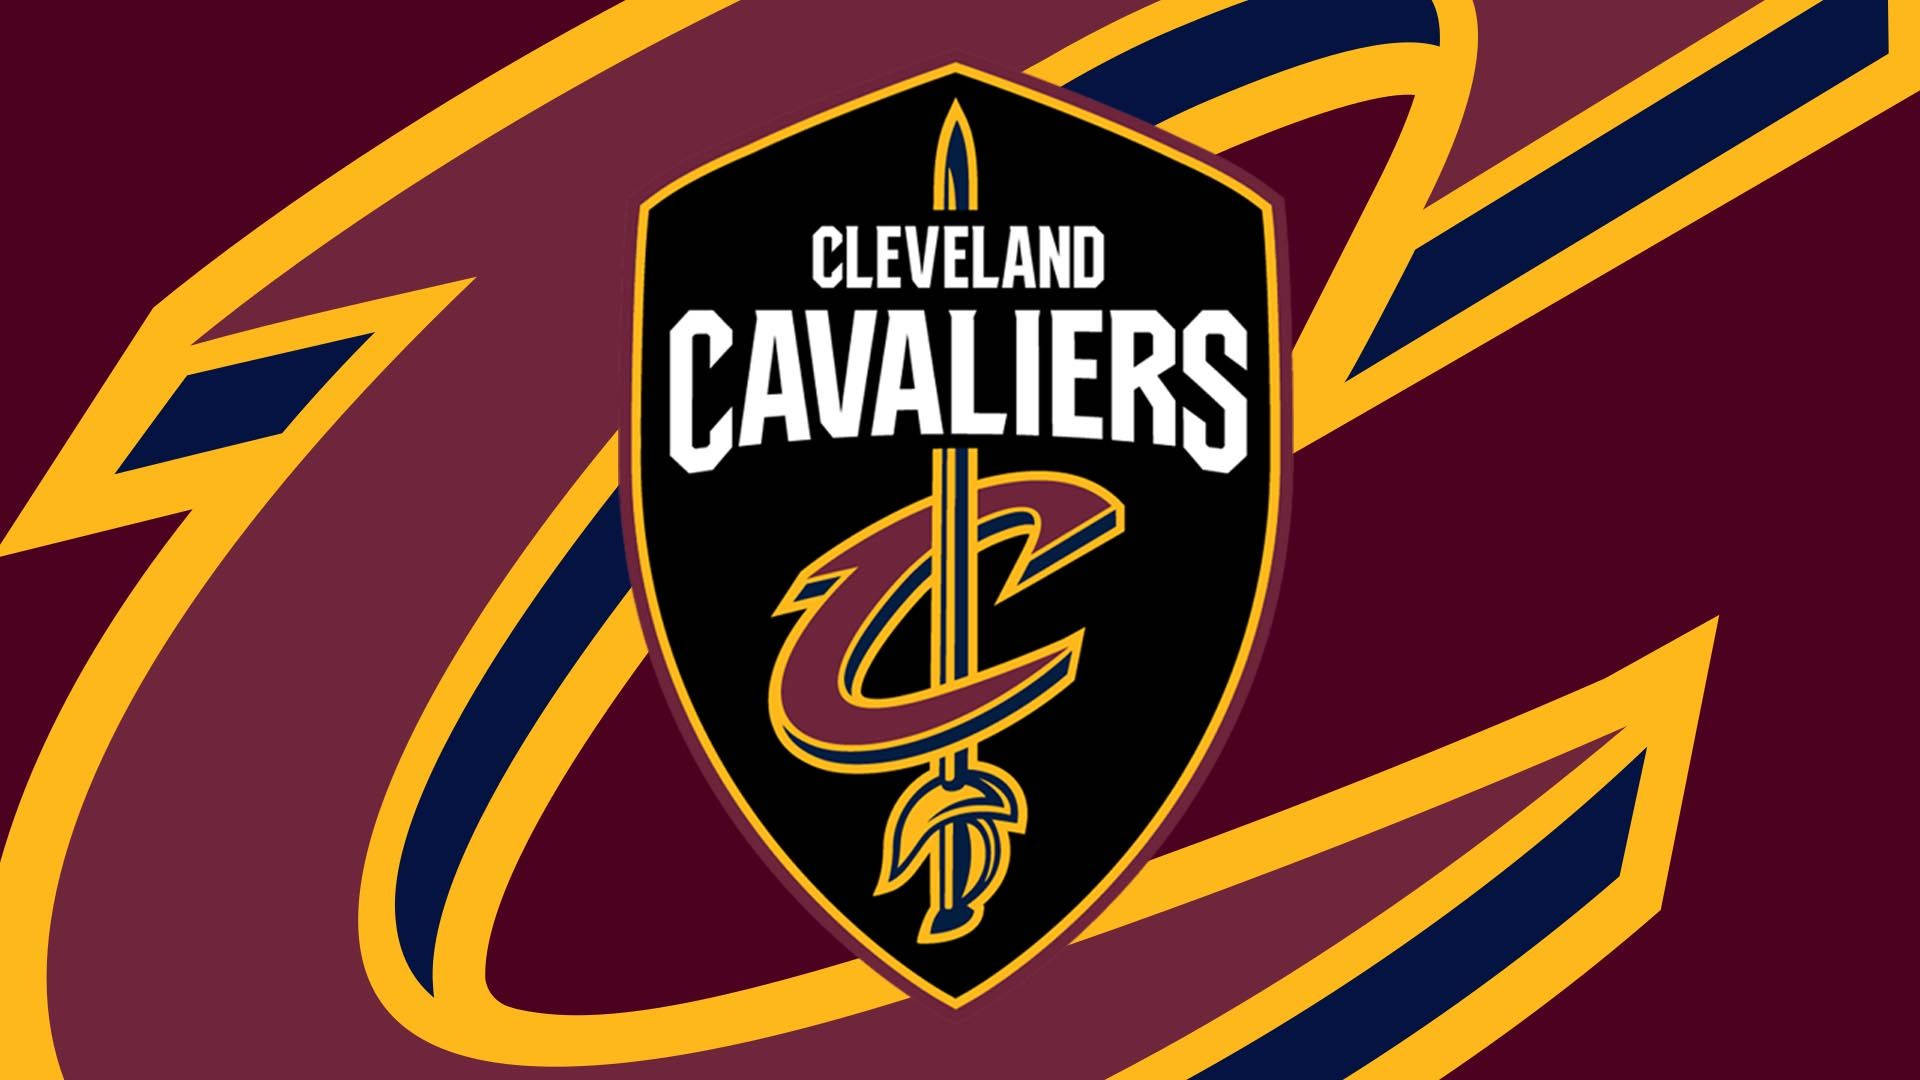 Free Cleveland Cavaliers Wallpaper Downloads, Cleveland Cavaliers Wallpaper for FREE